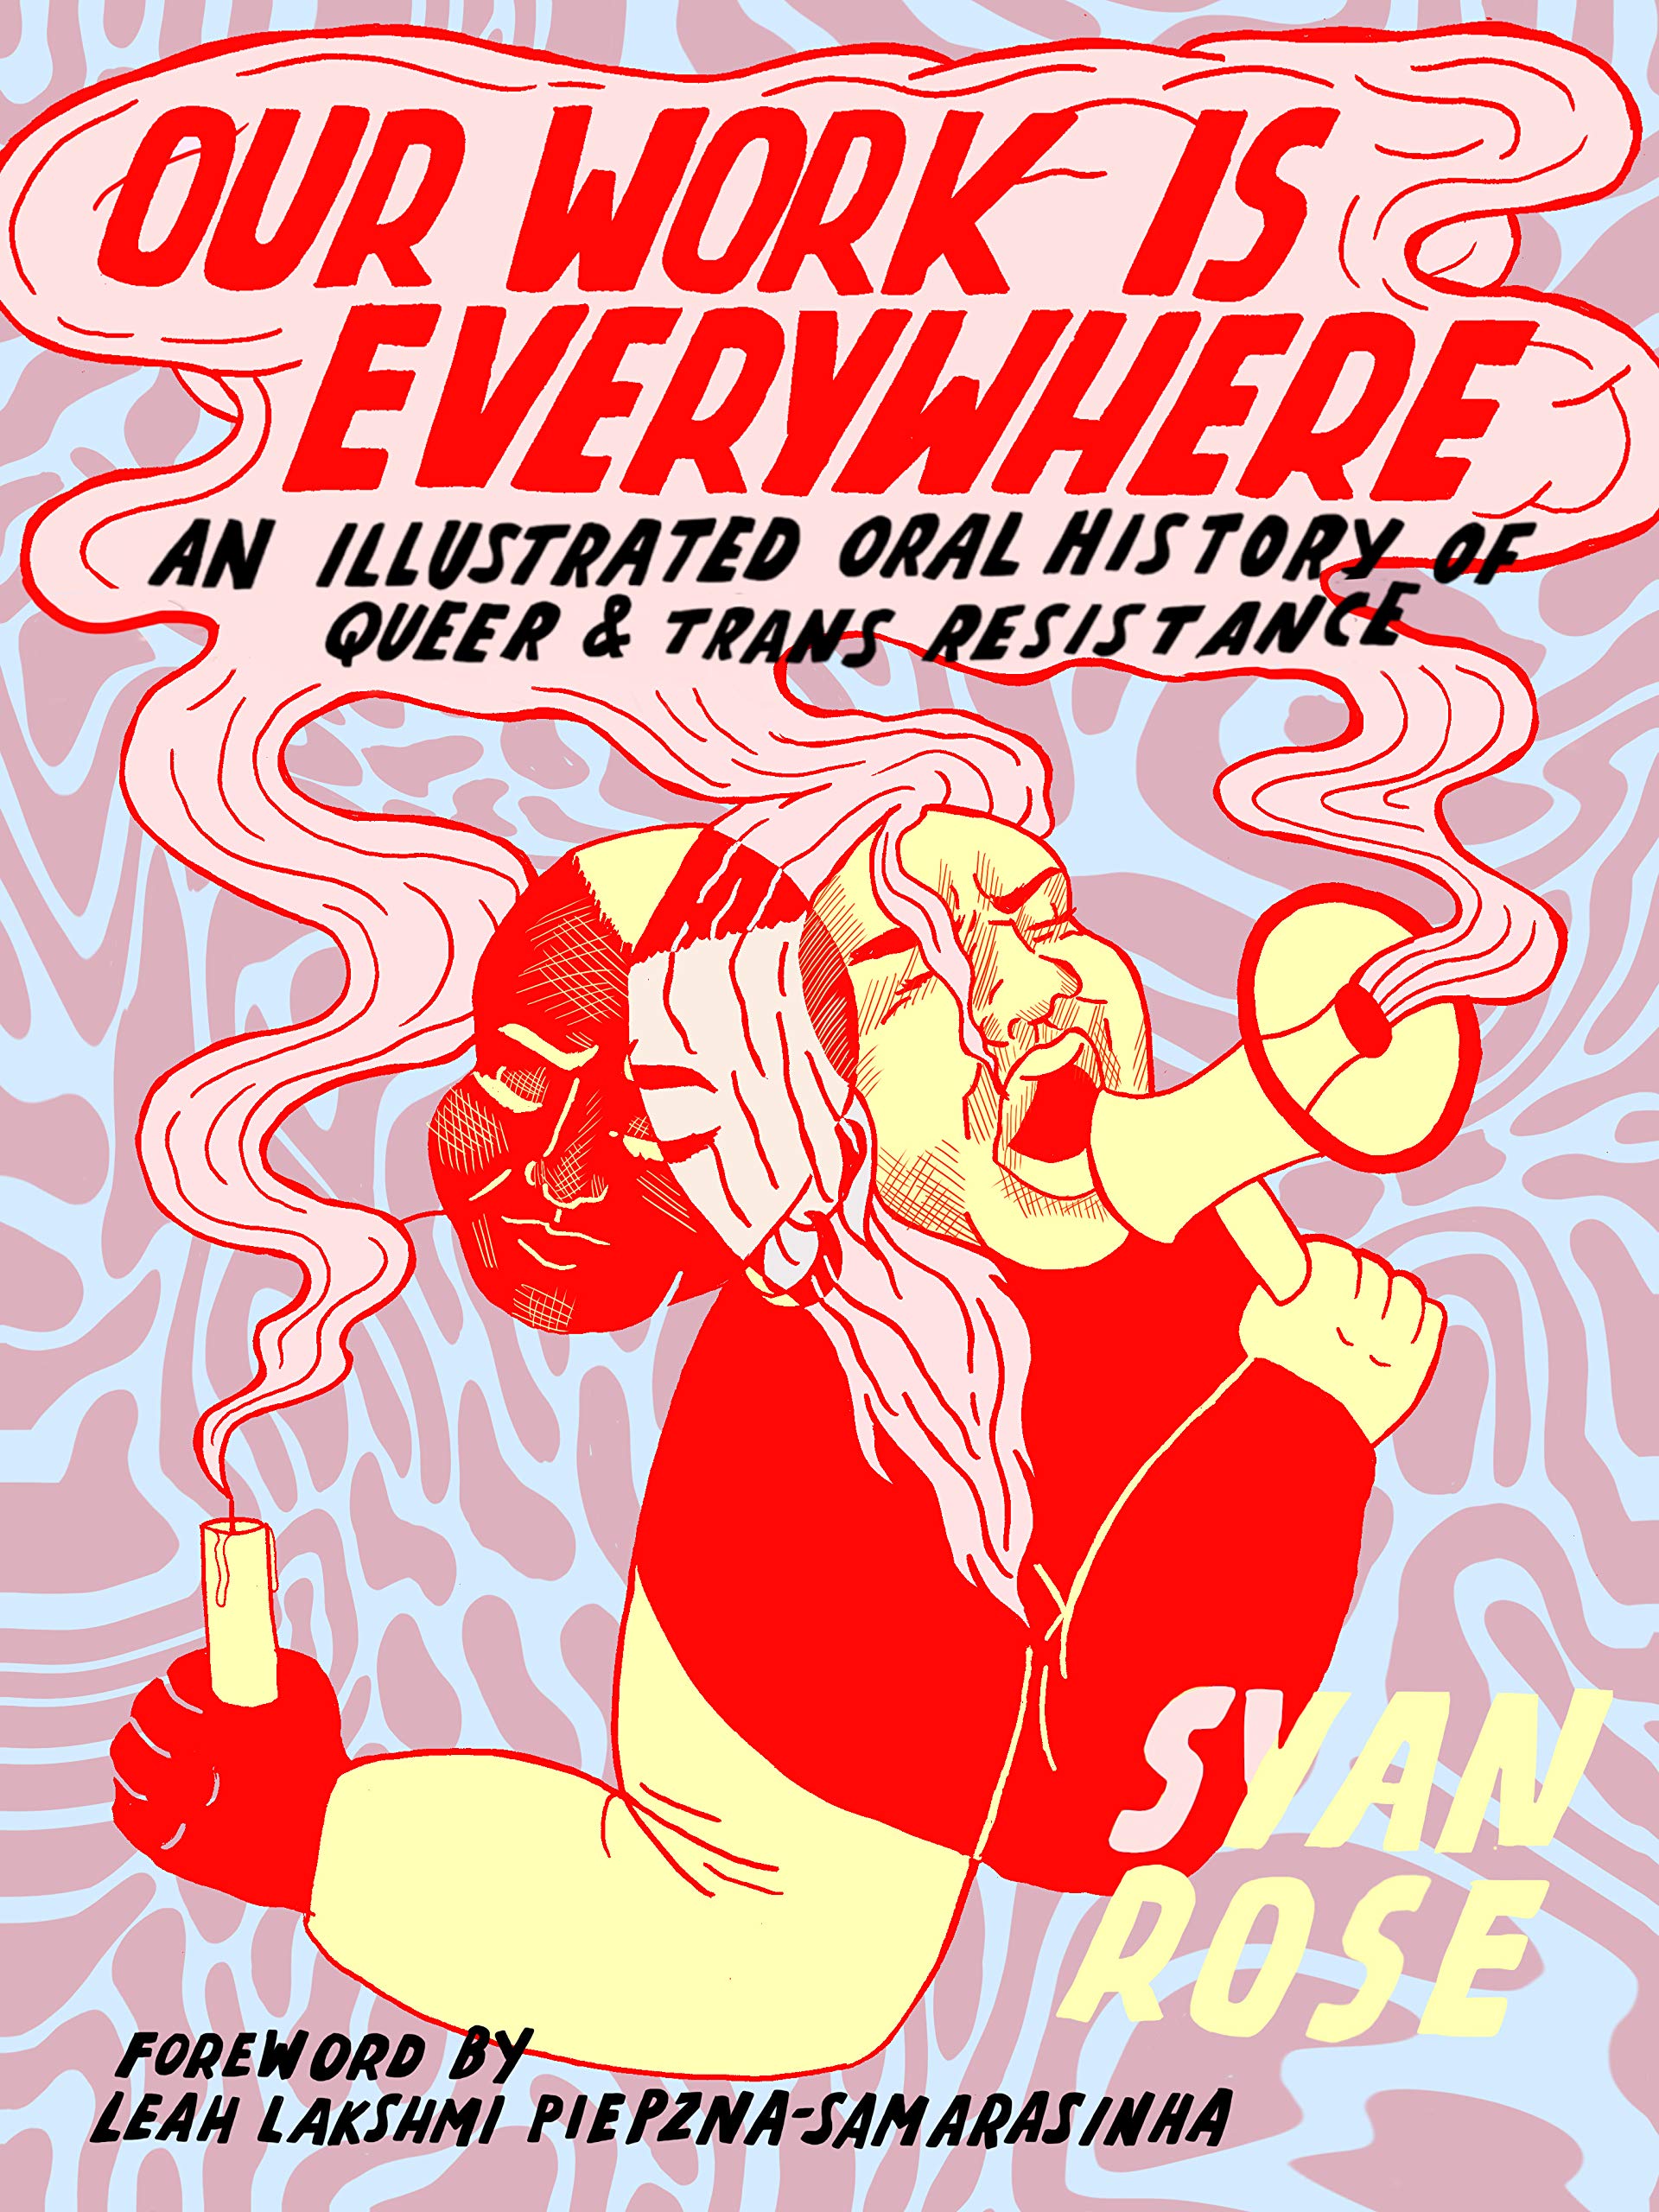 A colorful book cover with an illustration of a person screaming through a megaphone. The title reads "Our work os everywhere" in red letters.